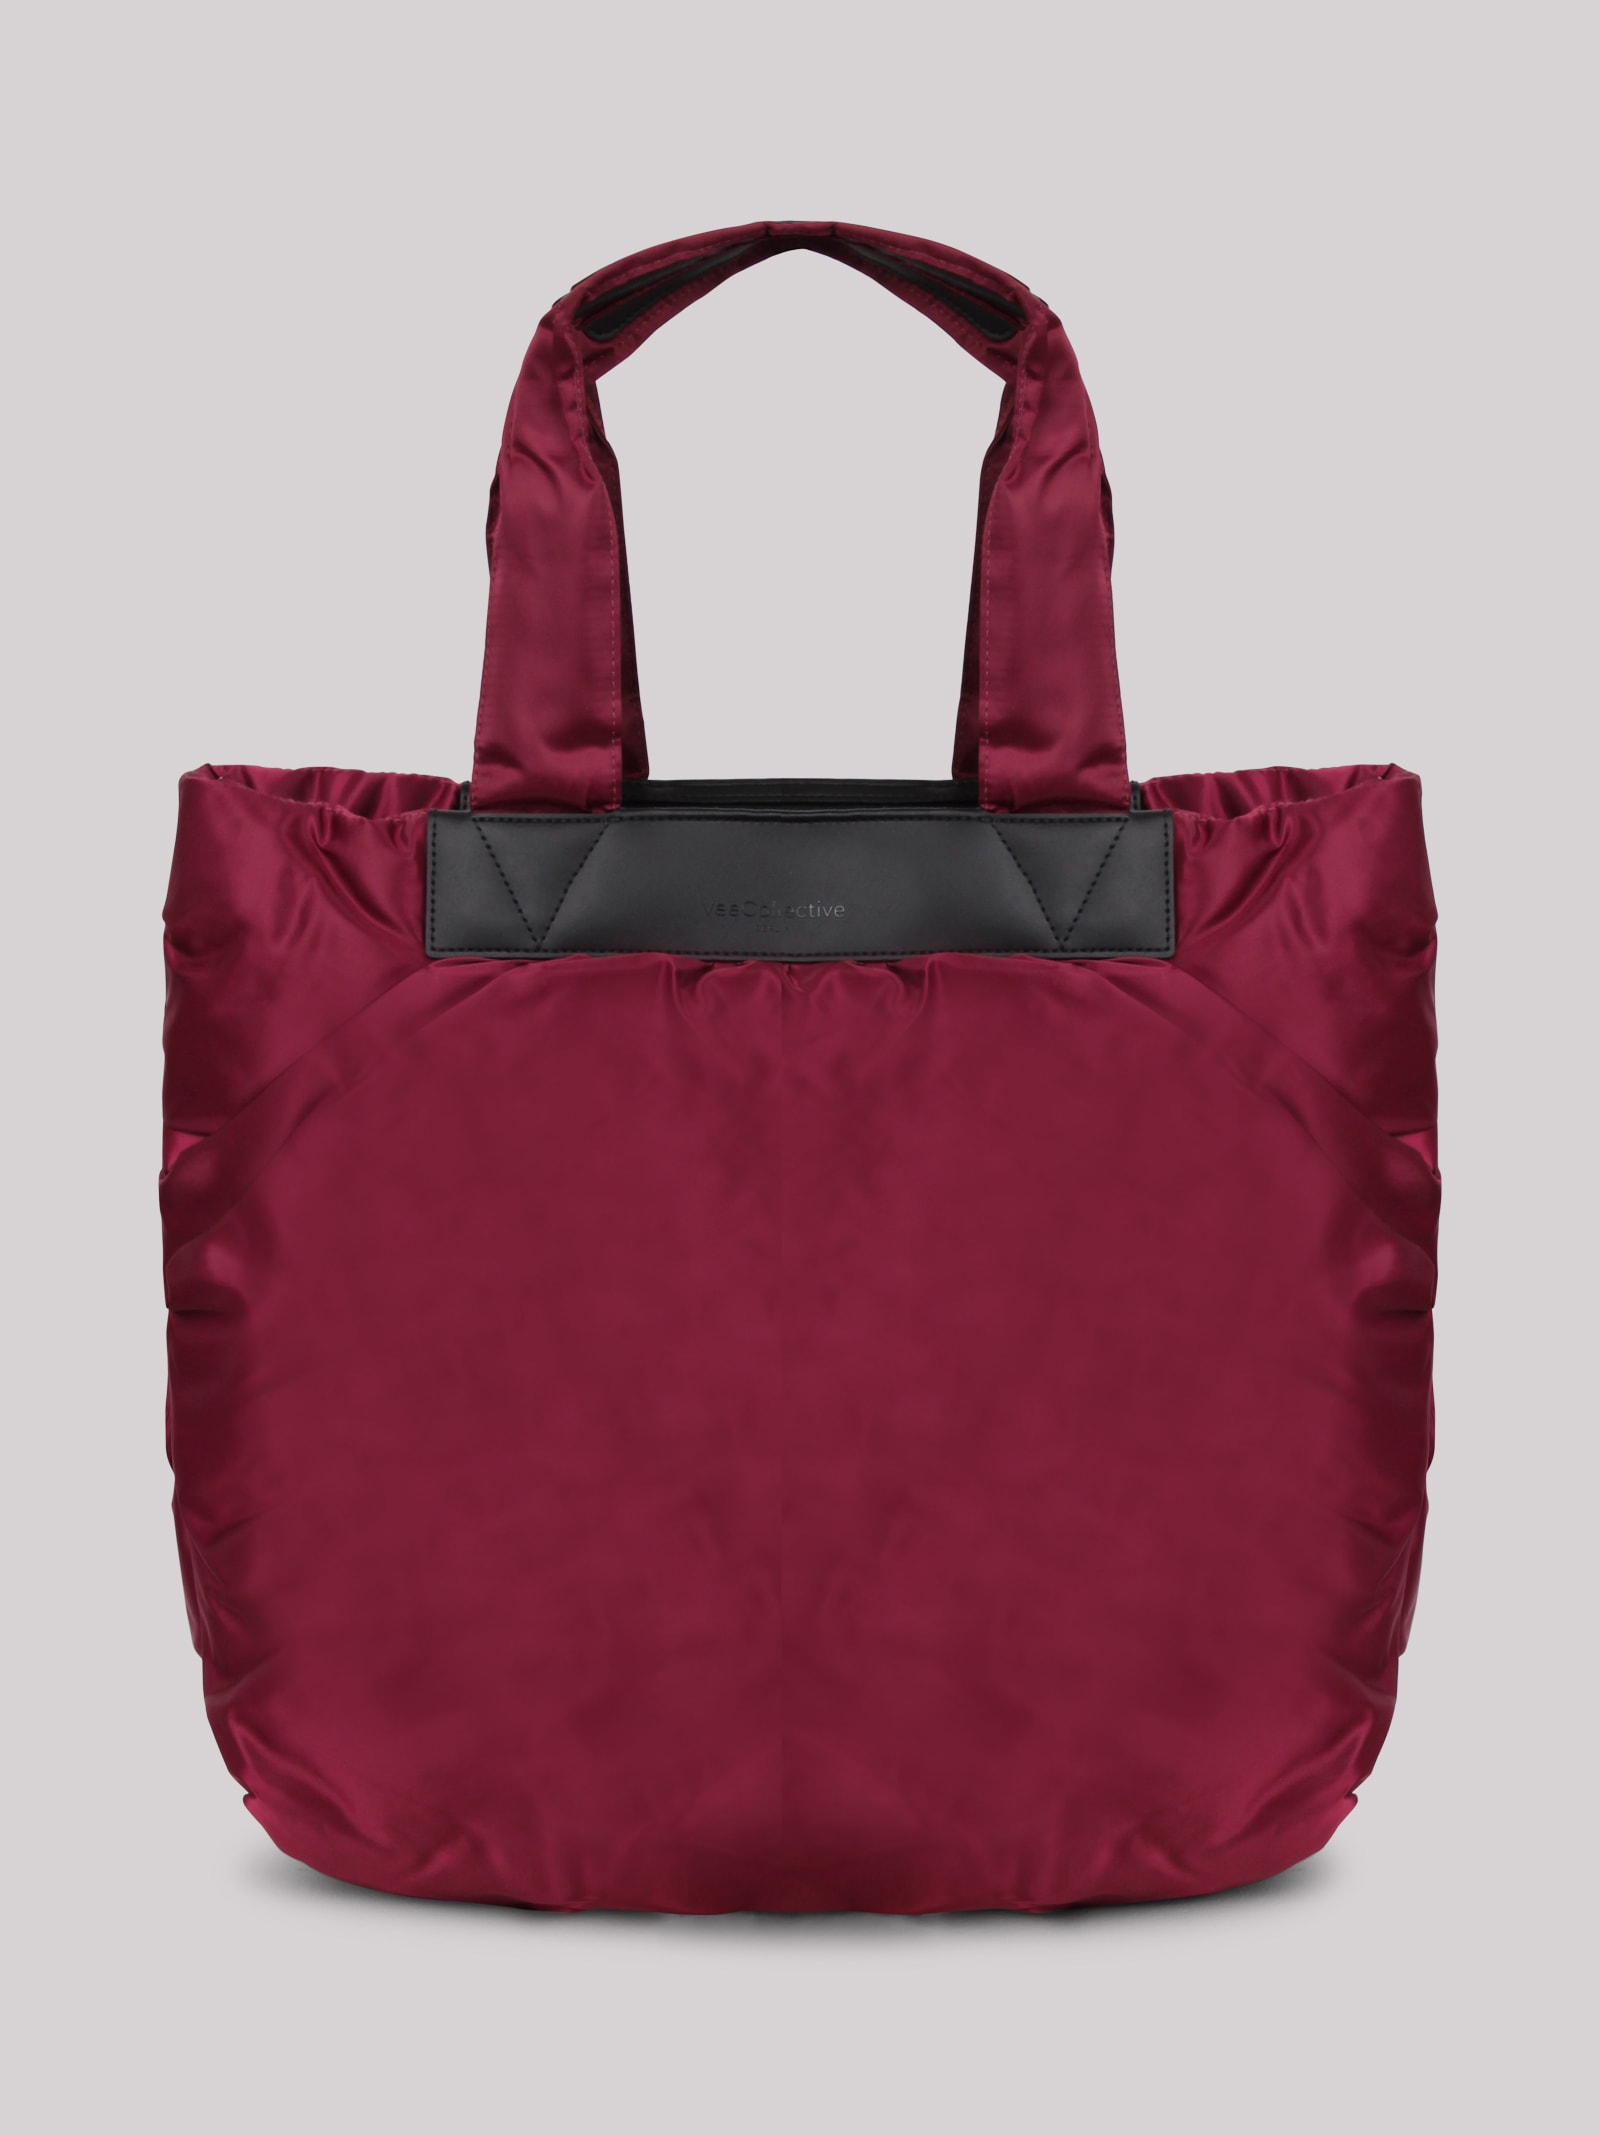 Veecollective Vee Collective Large Caba Ruched Tote Bag